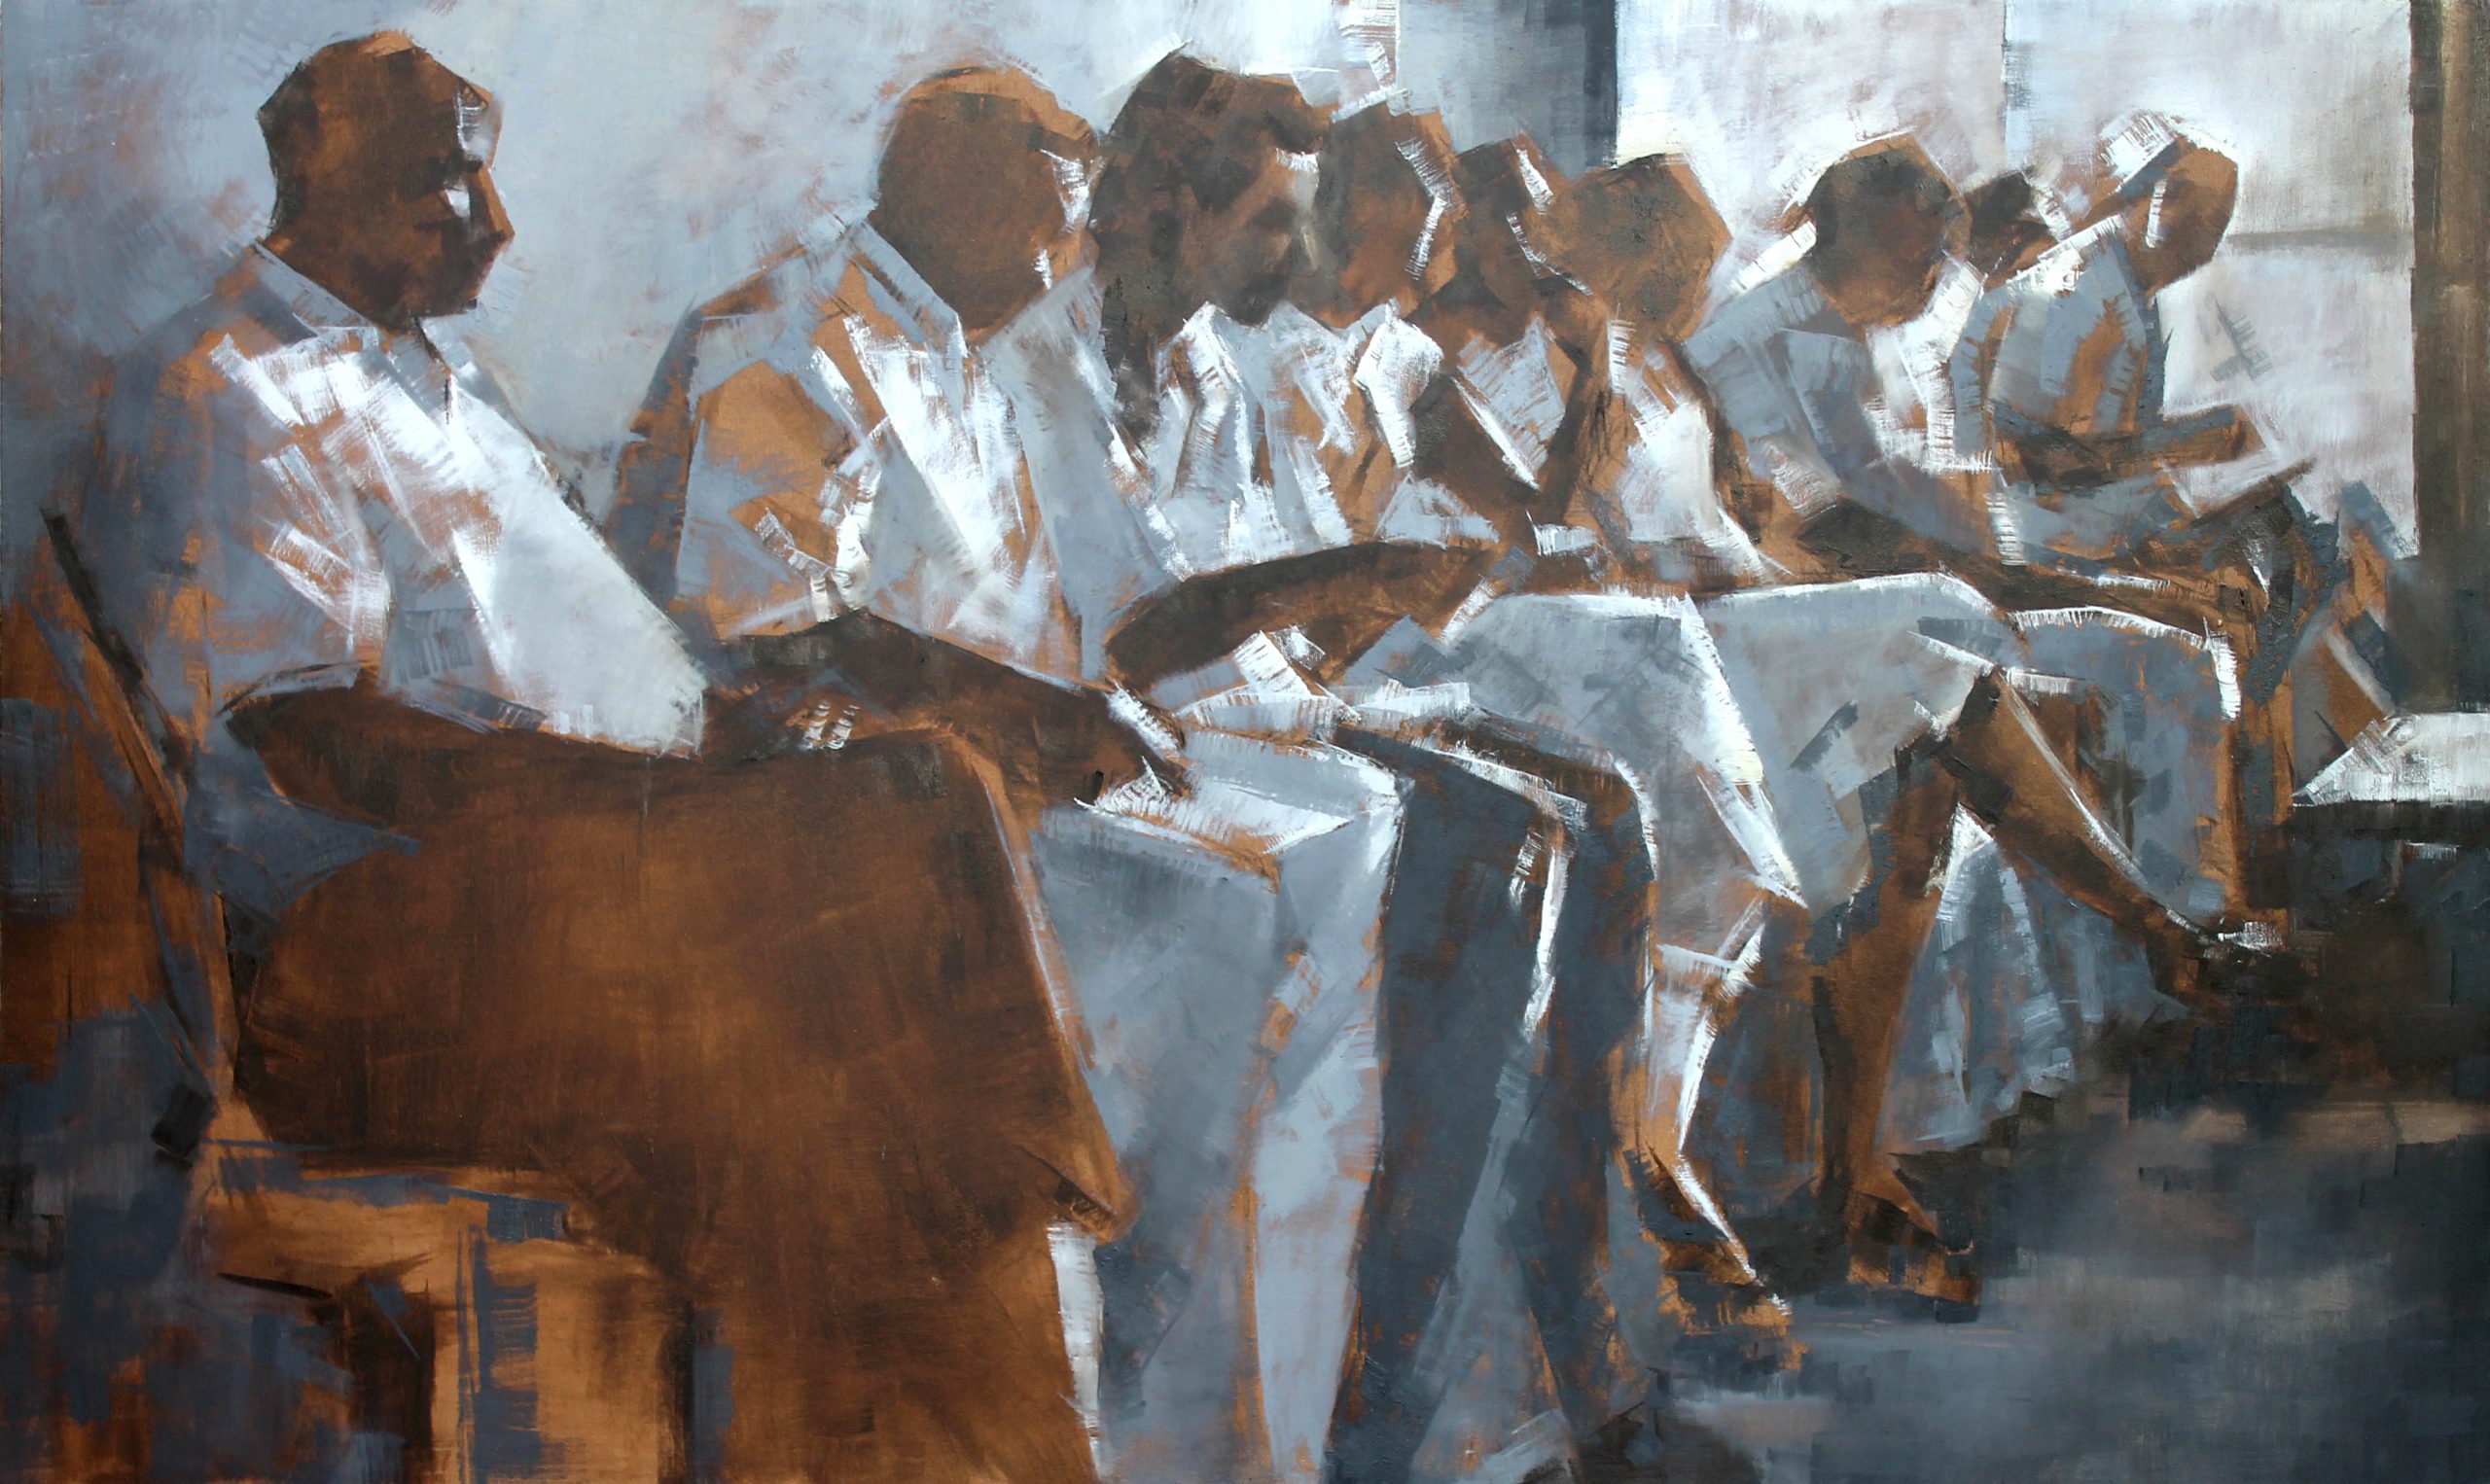 After the Wedding, 2023 
Oil on canvas 
35.4 x 59.1 in 
90 x 150 cm